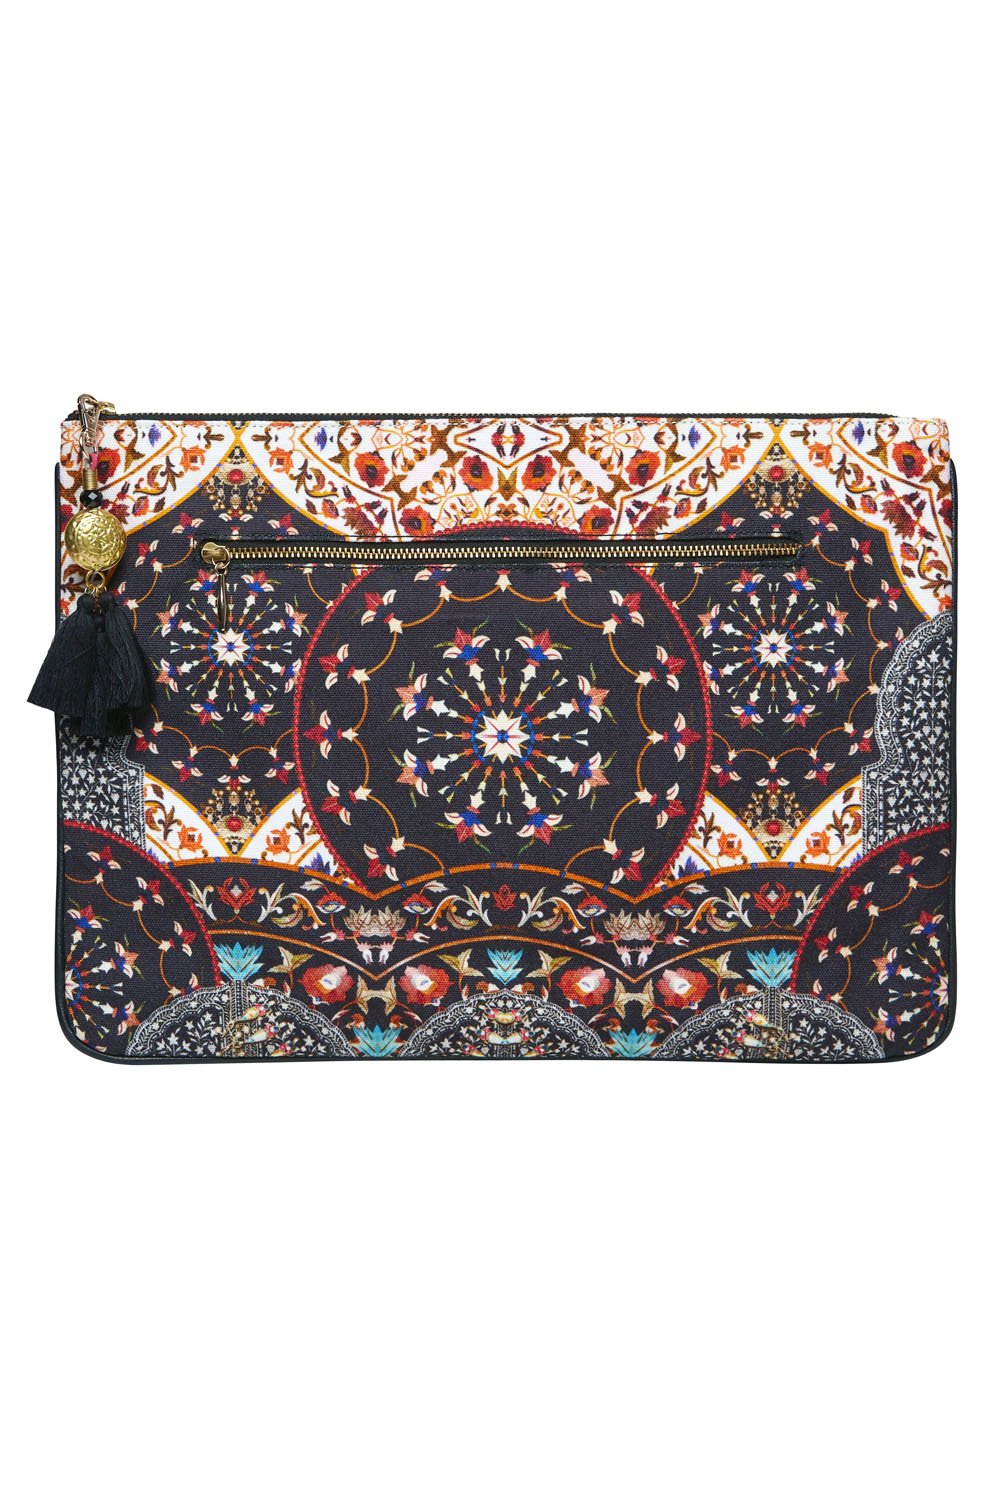 LARGE CANVAS CLUTCH CHAMBER OF REFLECTIONS